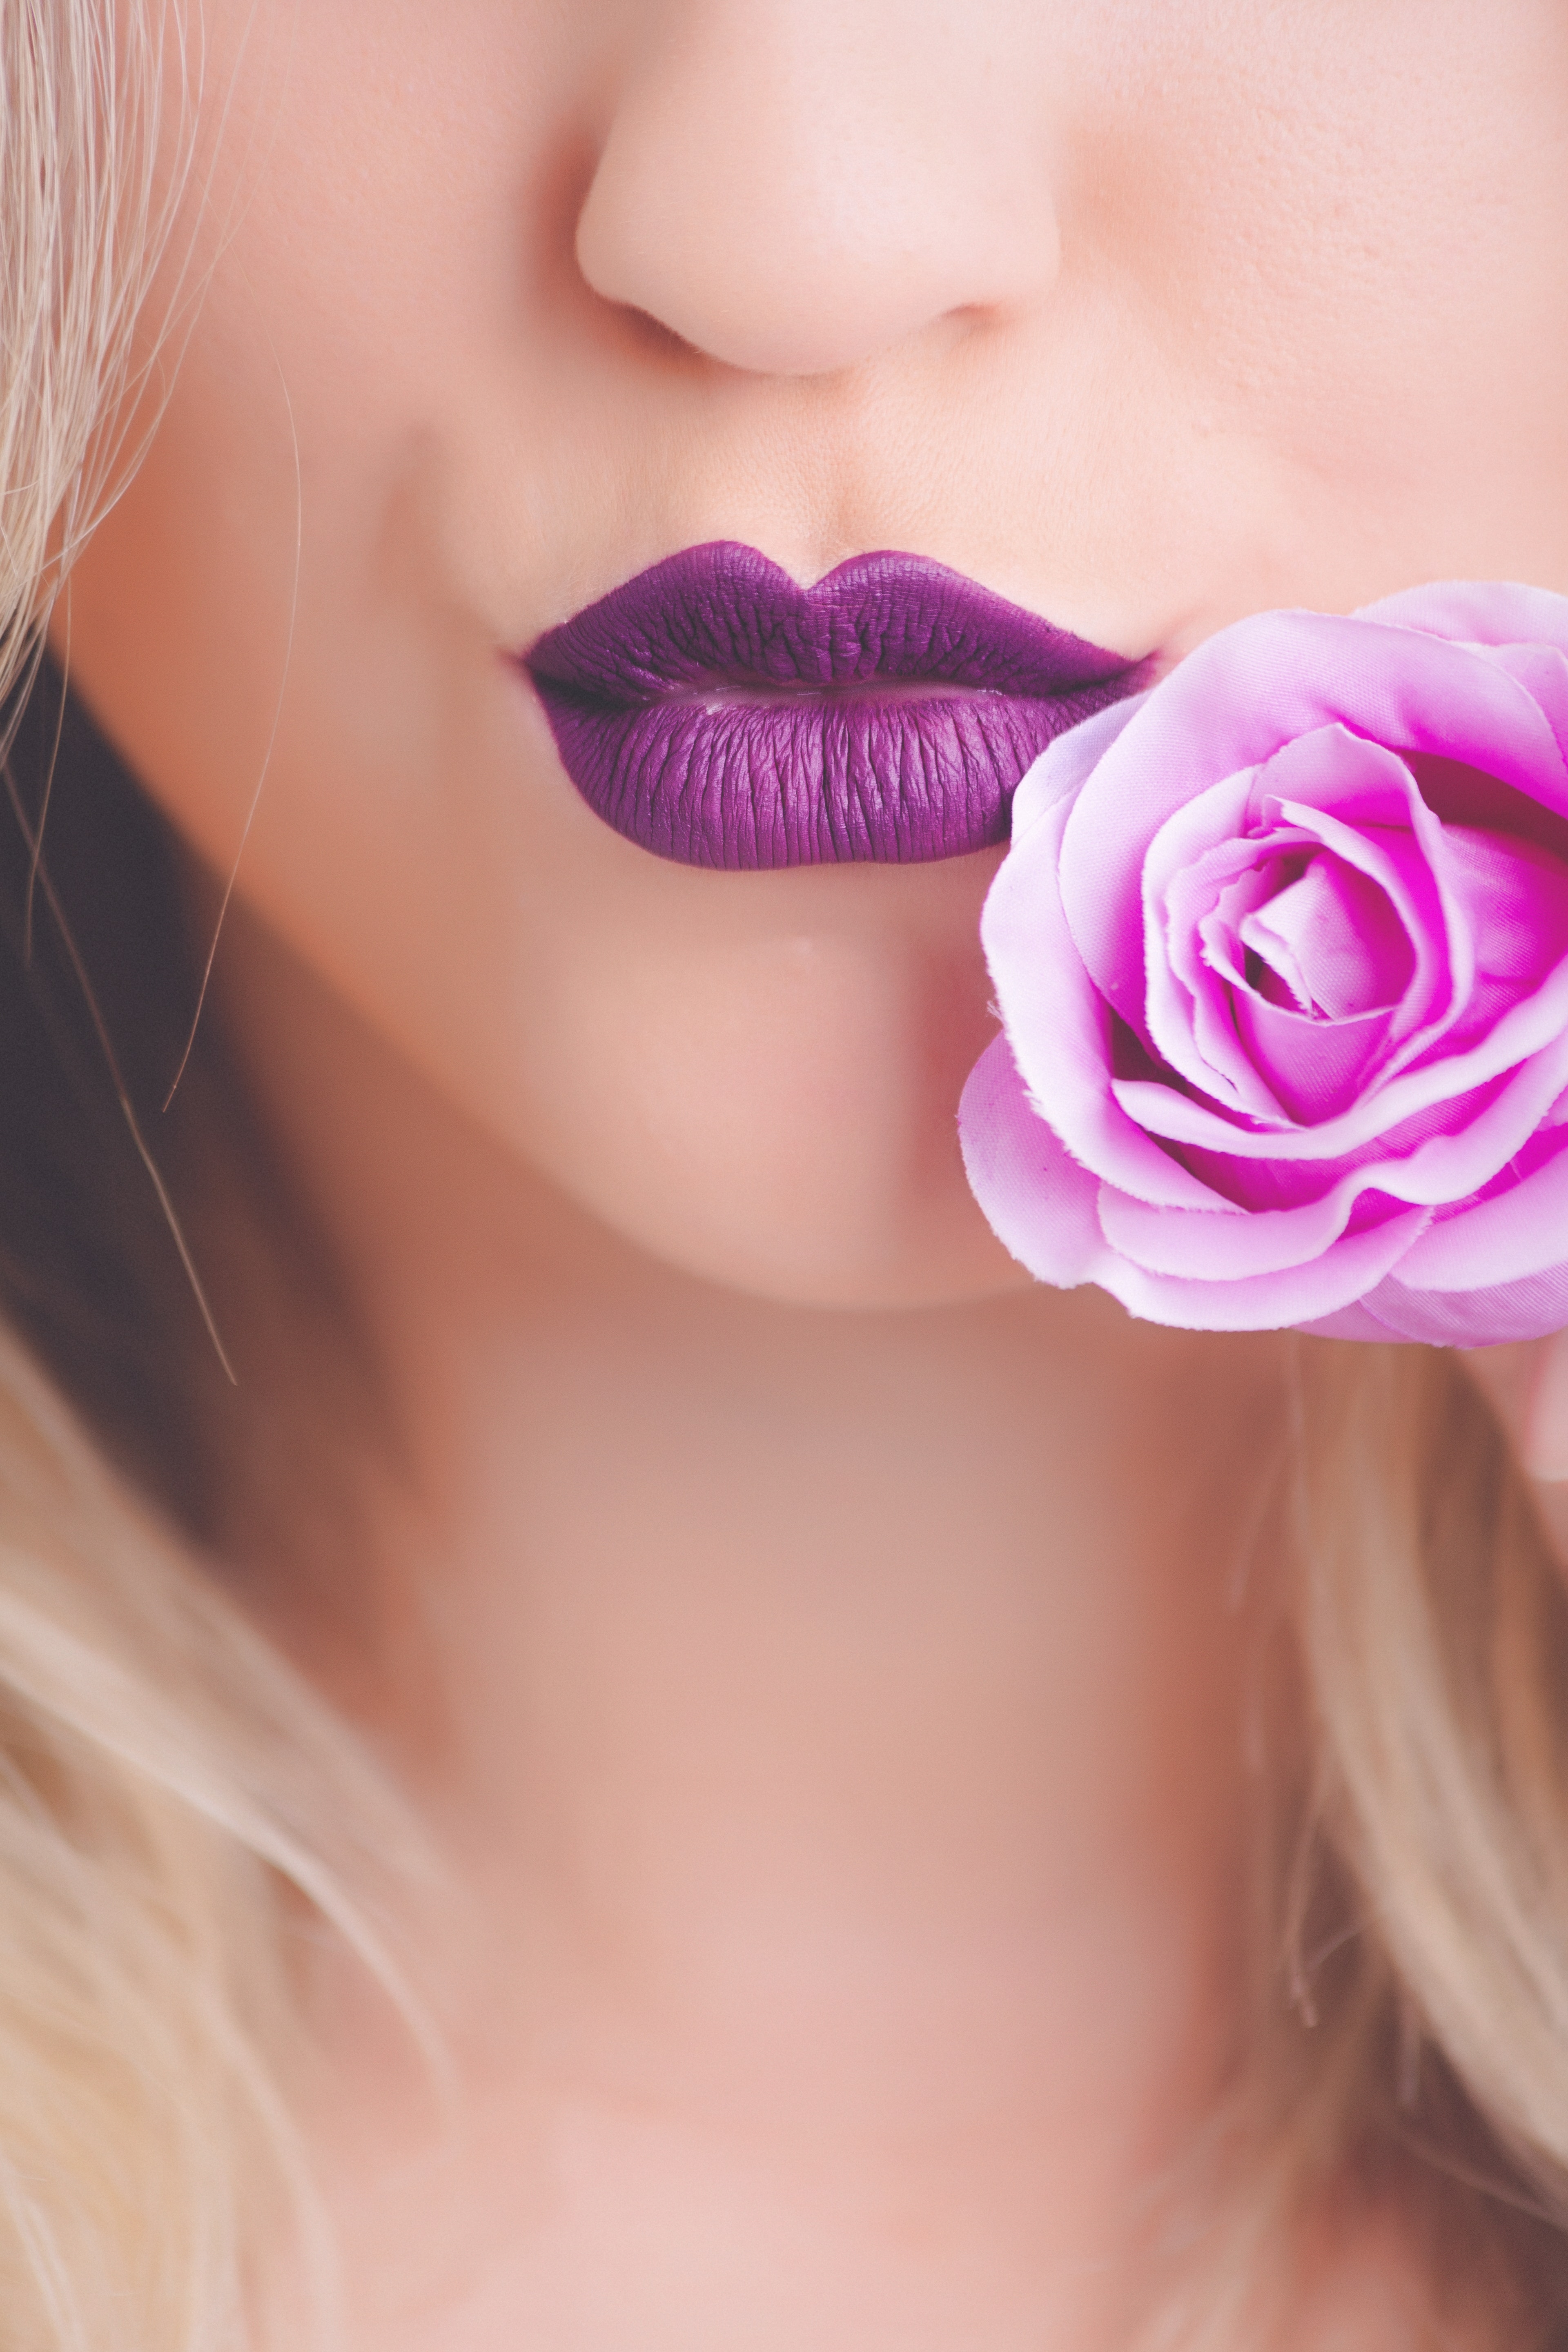 Woman Wearing Purple Lipstick With Pink Rose on Her Cheeks, Pose, Person, Photoshoot, Pink, HQ Photo